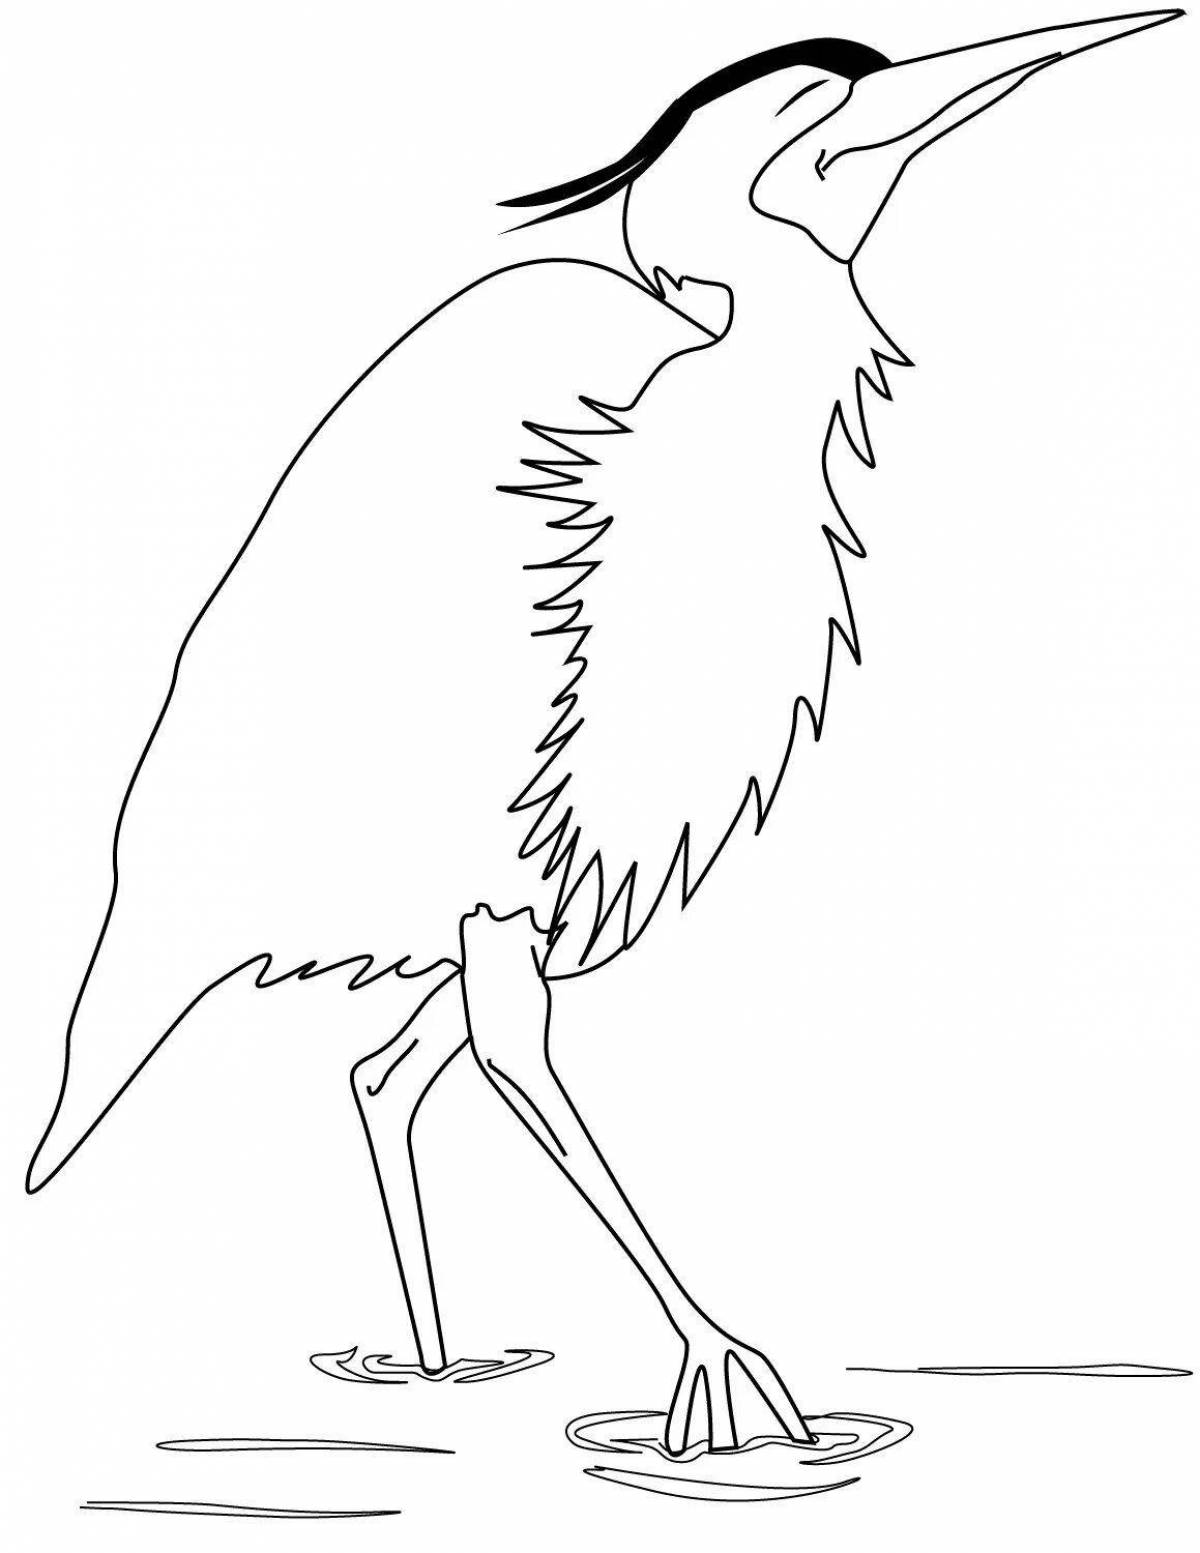 Coloring book happy heron for kids